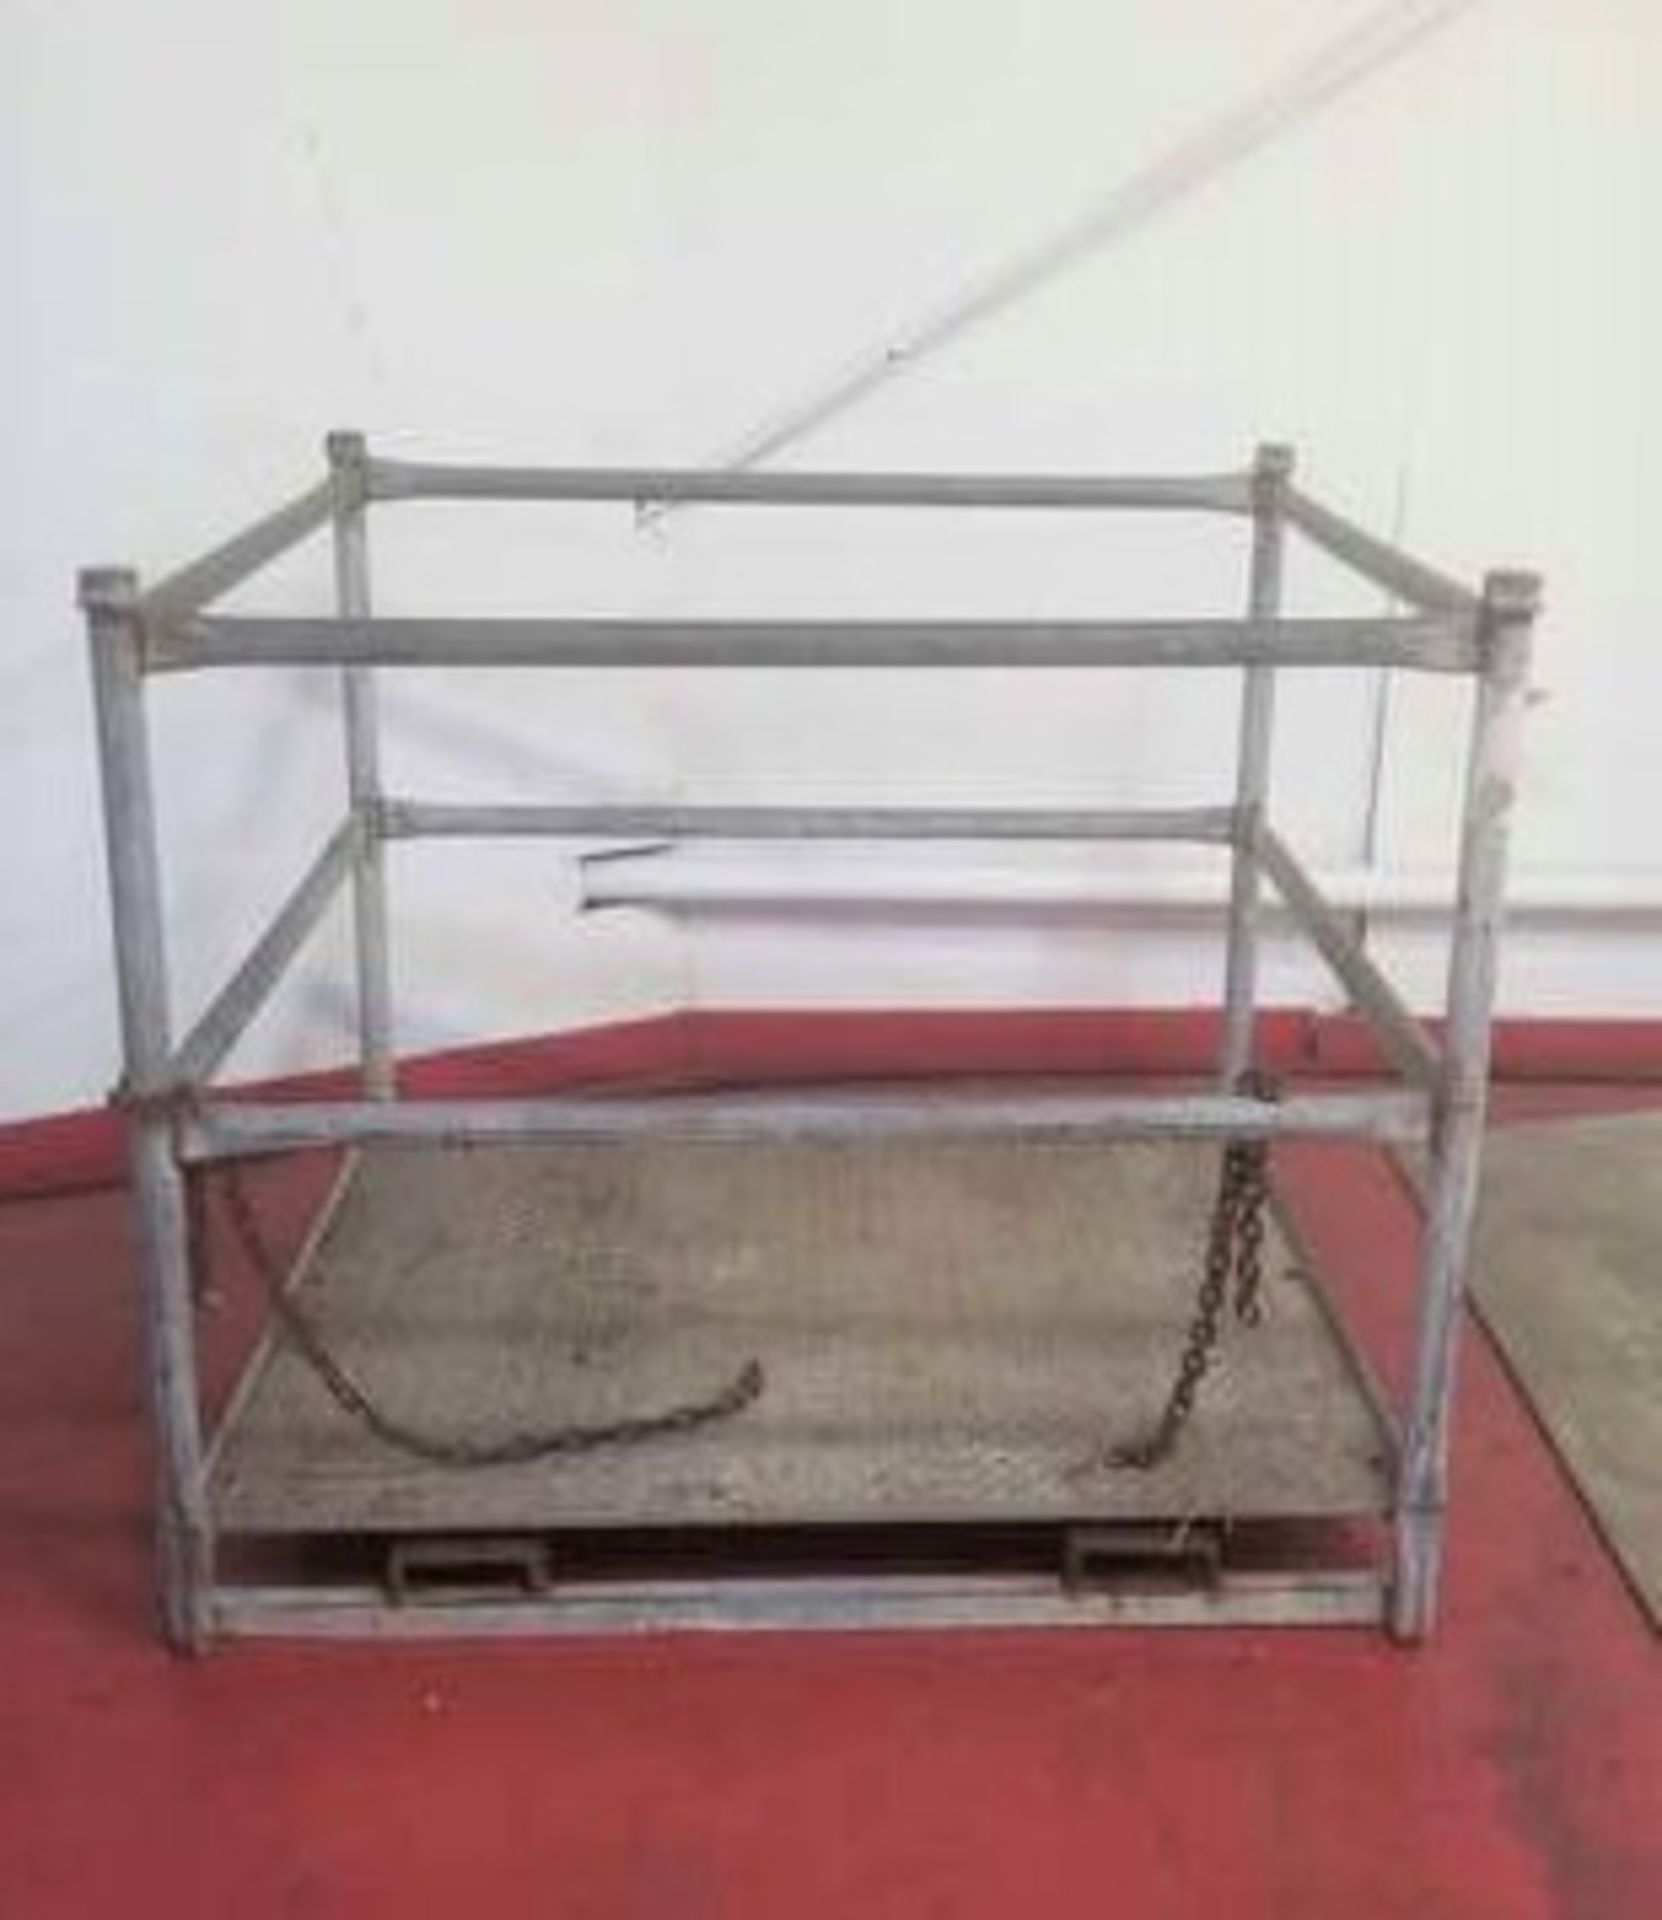 Galvanized Manlift for use with Forklift. Cage is 44" x 50" x 42" High. Offered AS IS FOB Prairie